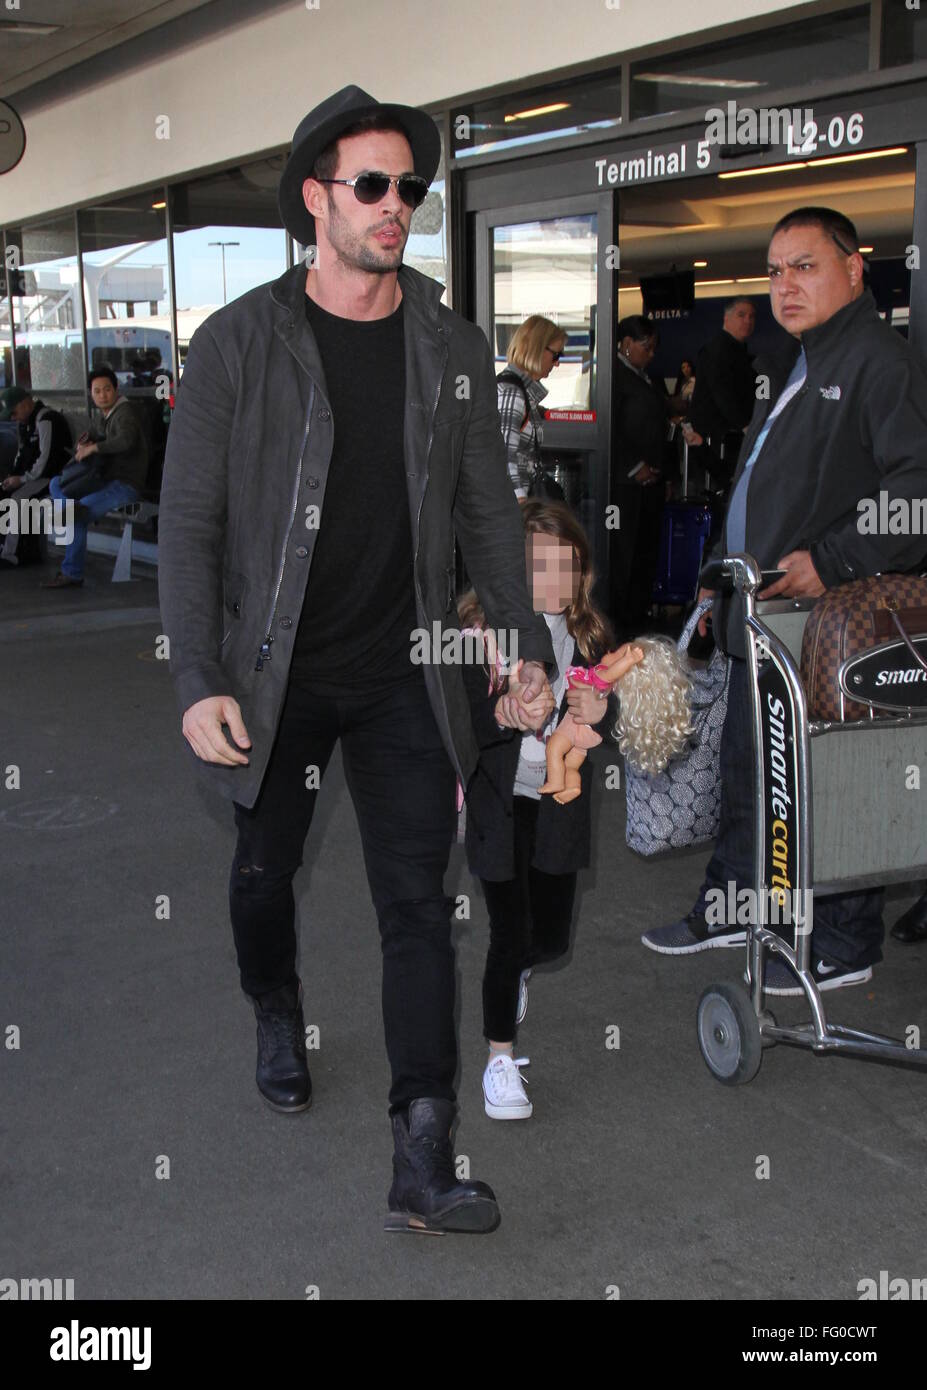 William Levy arrives at Los Angeles International Airport (LAX) with Elizabeth Gutierrez and their children, Christopher and Kailey  Featuring: William Levy, Kailey Alexandra Levy Where: Los Angeles, California, United States When: 08 Jan 2016 Stock Photo